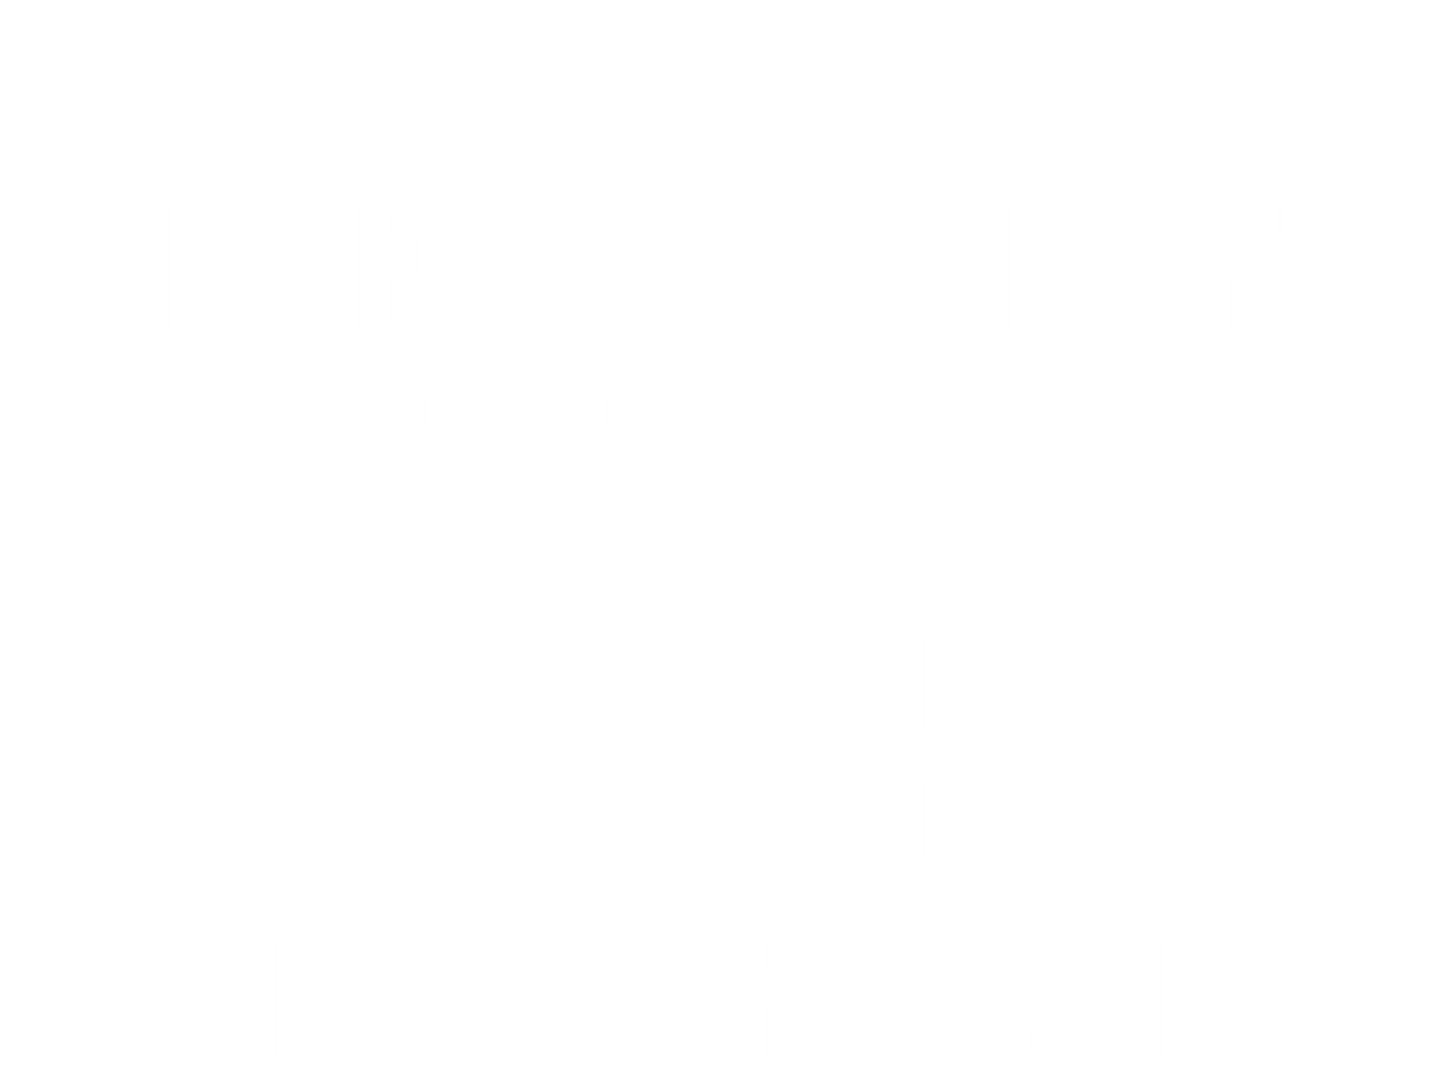 My Wifes Cooking Is So Bad, We Pray After The Meal